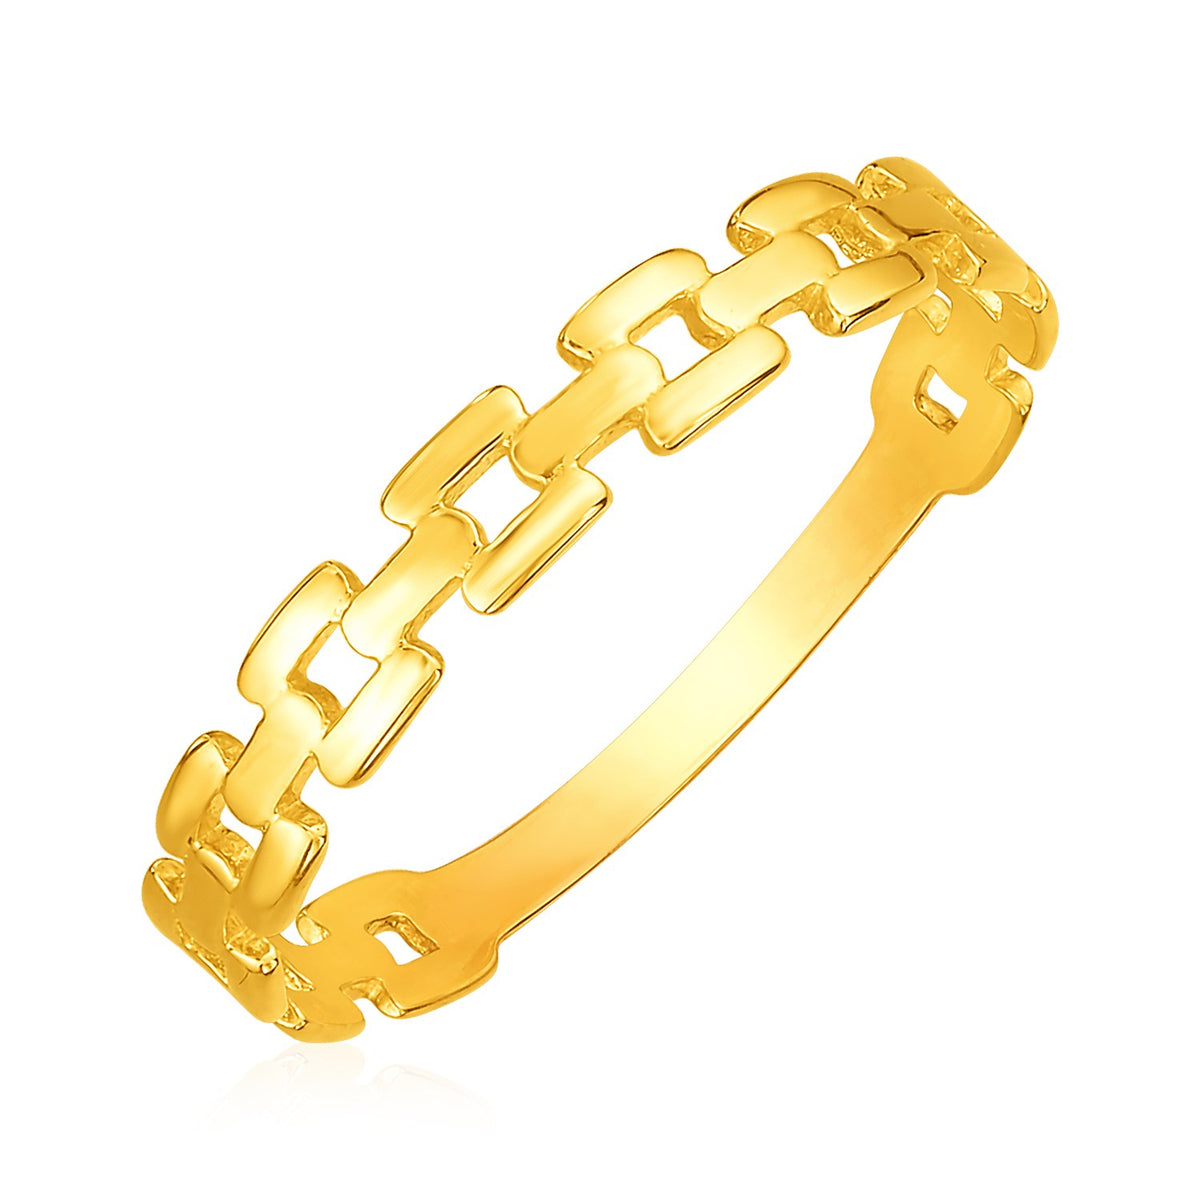 Chain Link Ring - 14k Yellow Gold